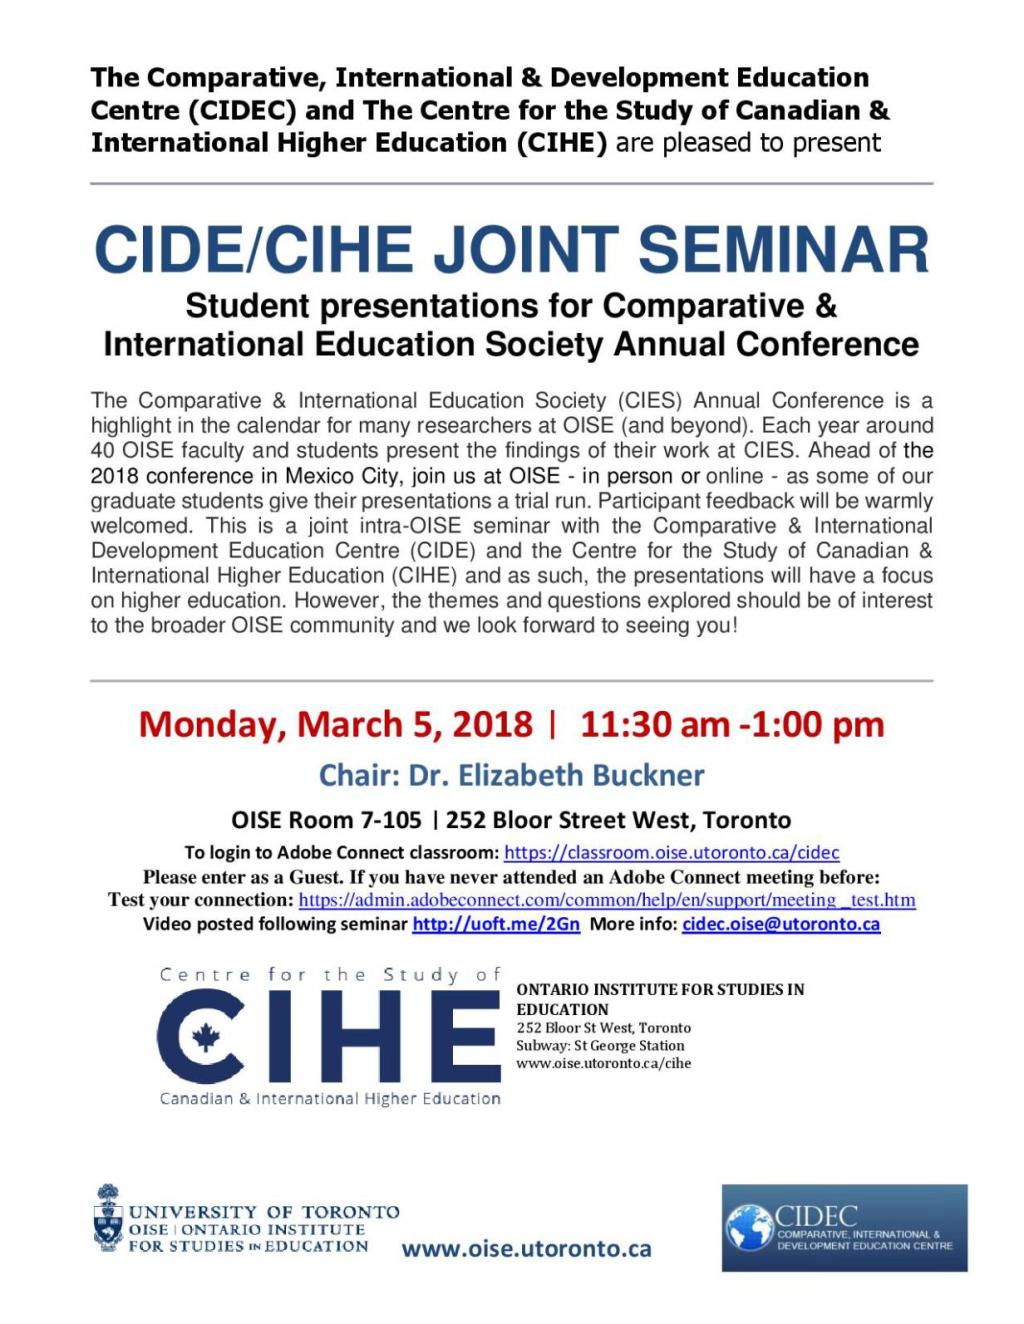 Seminar // March 5, 2018 // Comparing internationalization in higher education in Tajikistan and Iraq, plus other papers